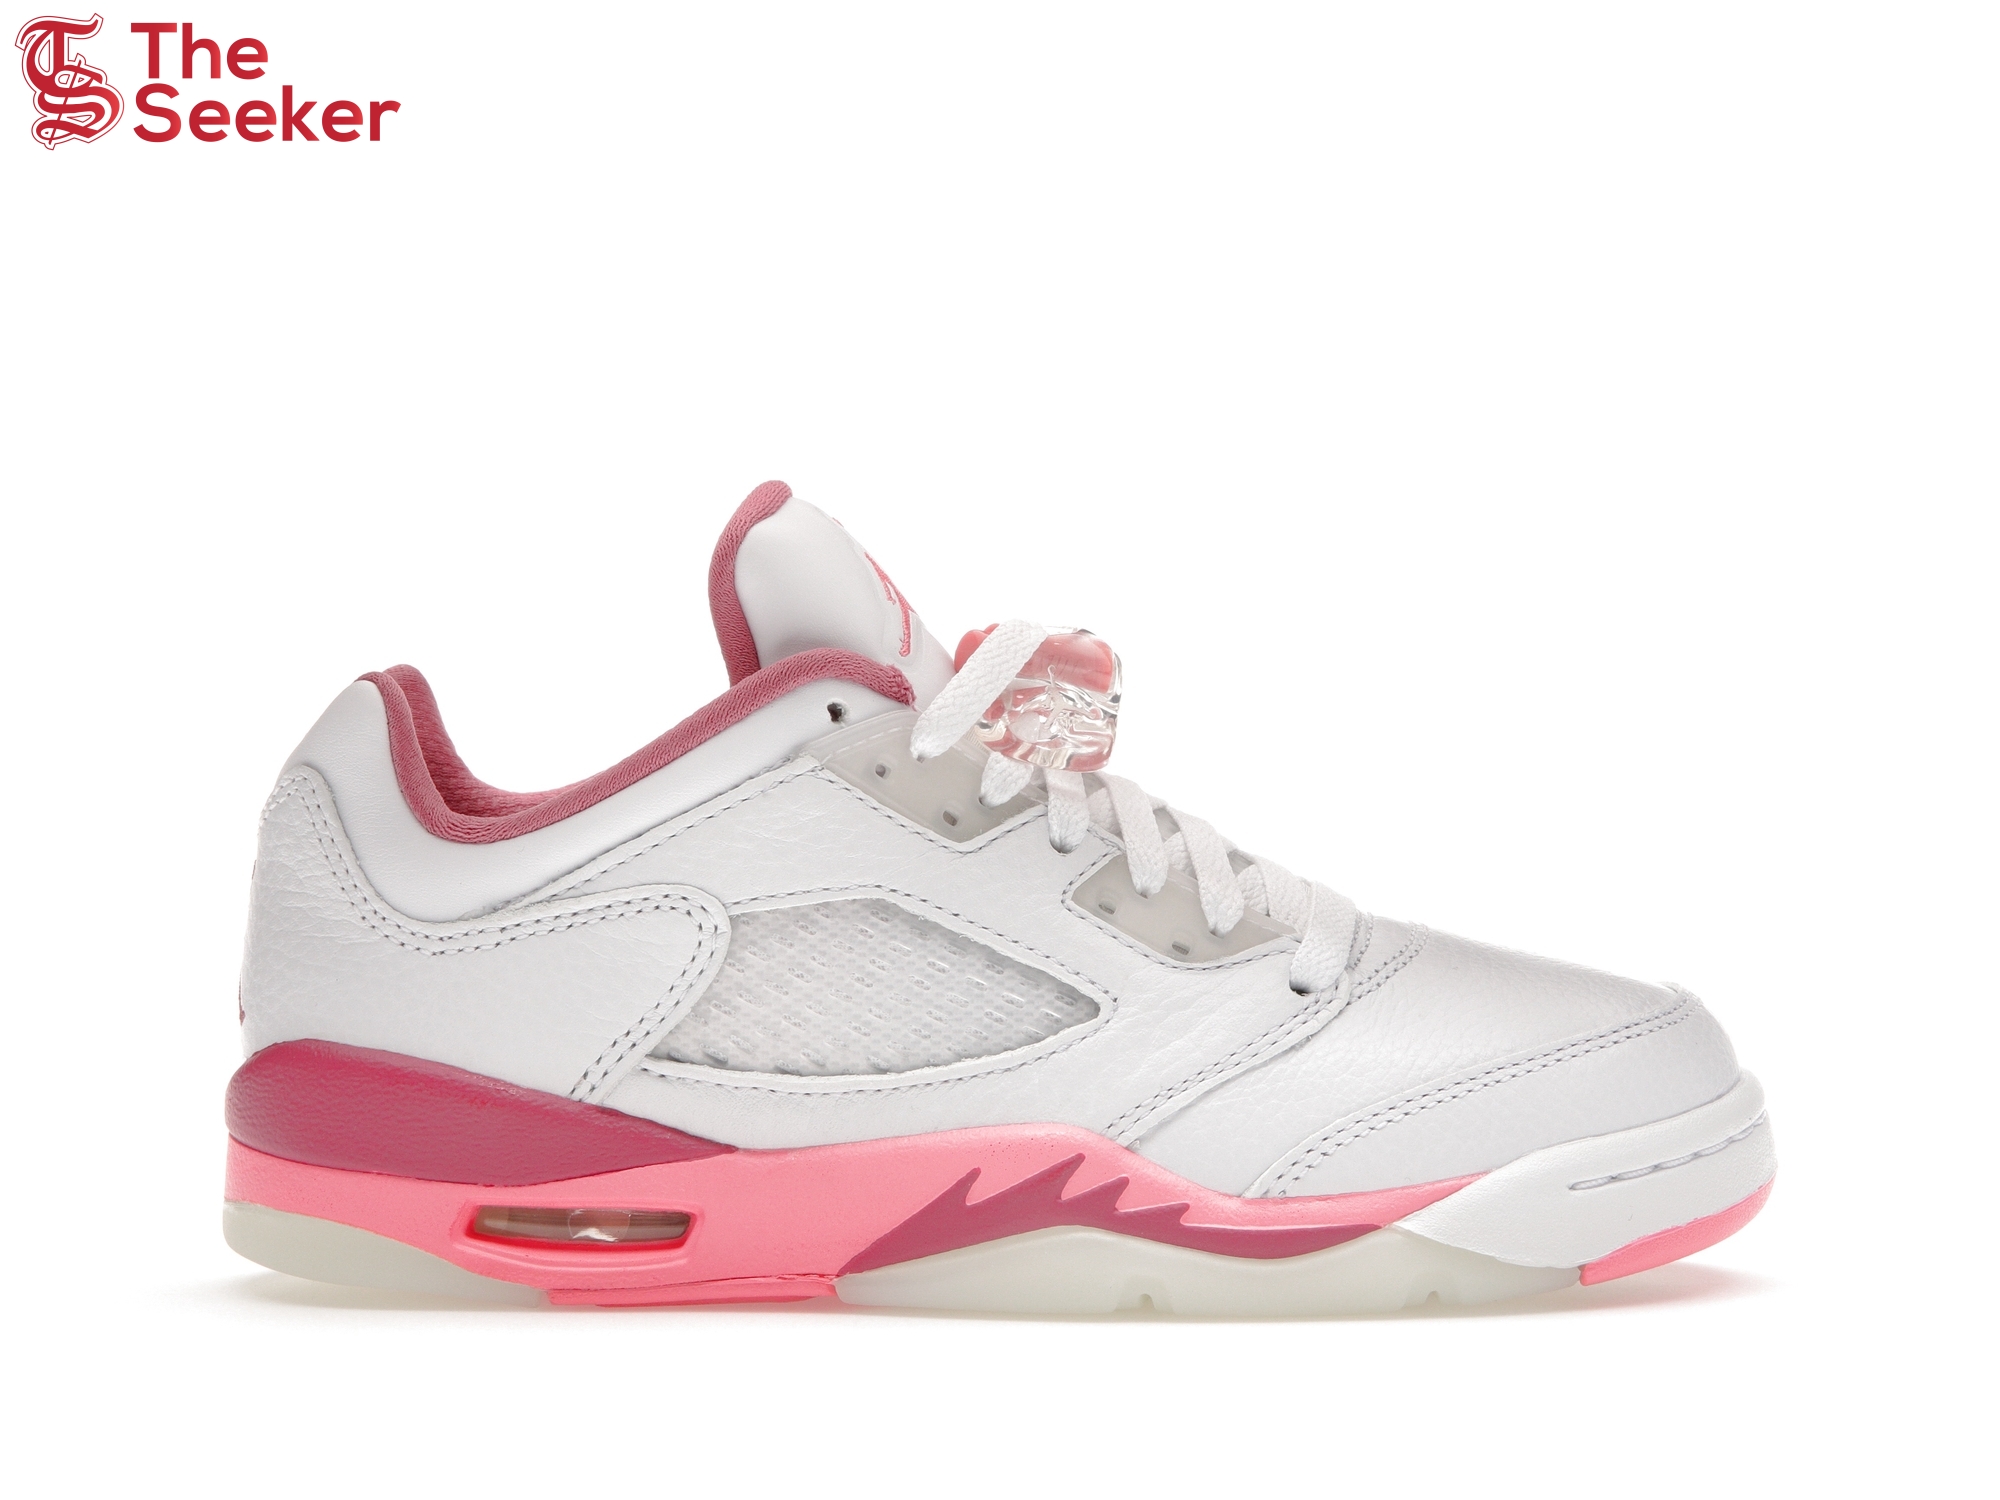 Jordan 5 Retro Low Crafted For Her Desert Berry (GS)